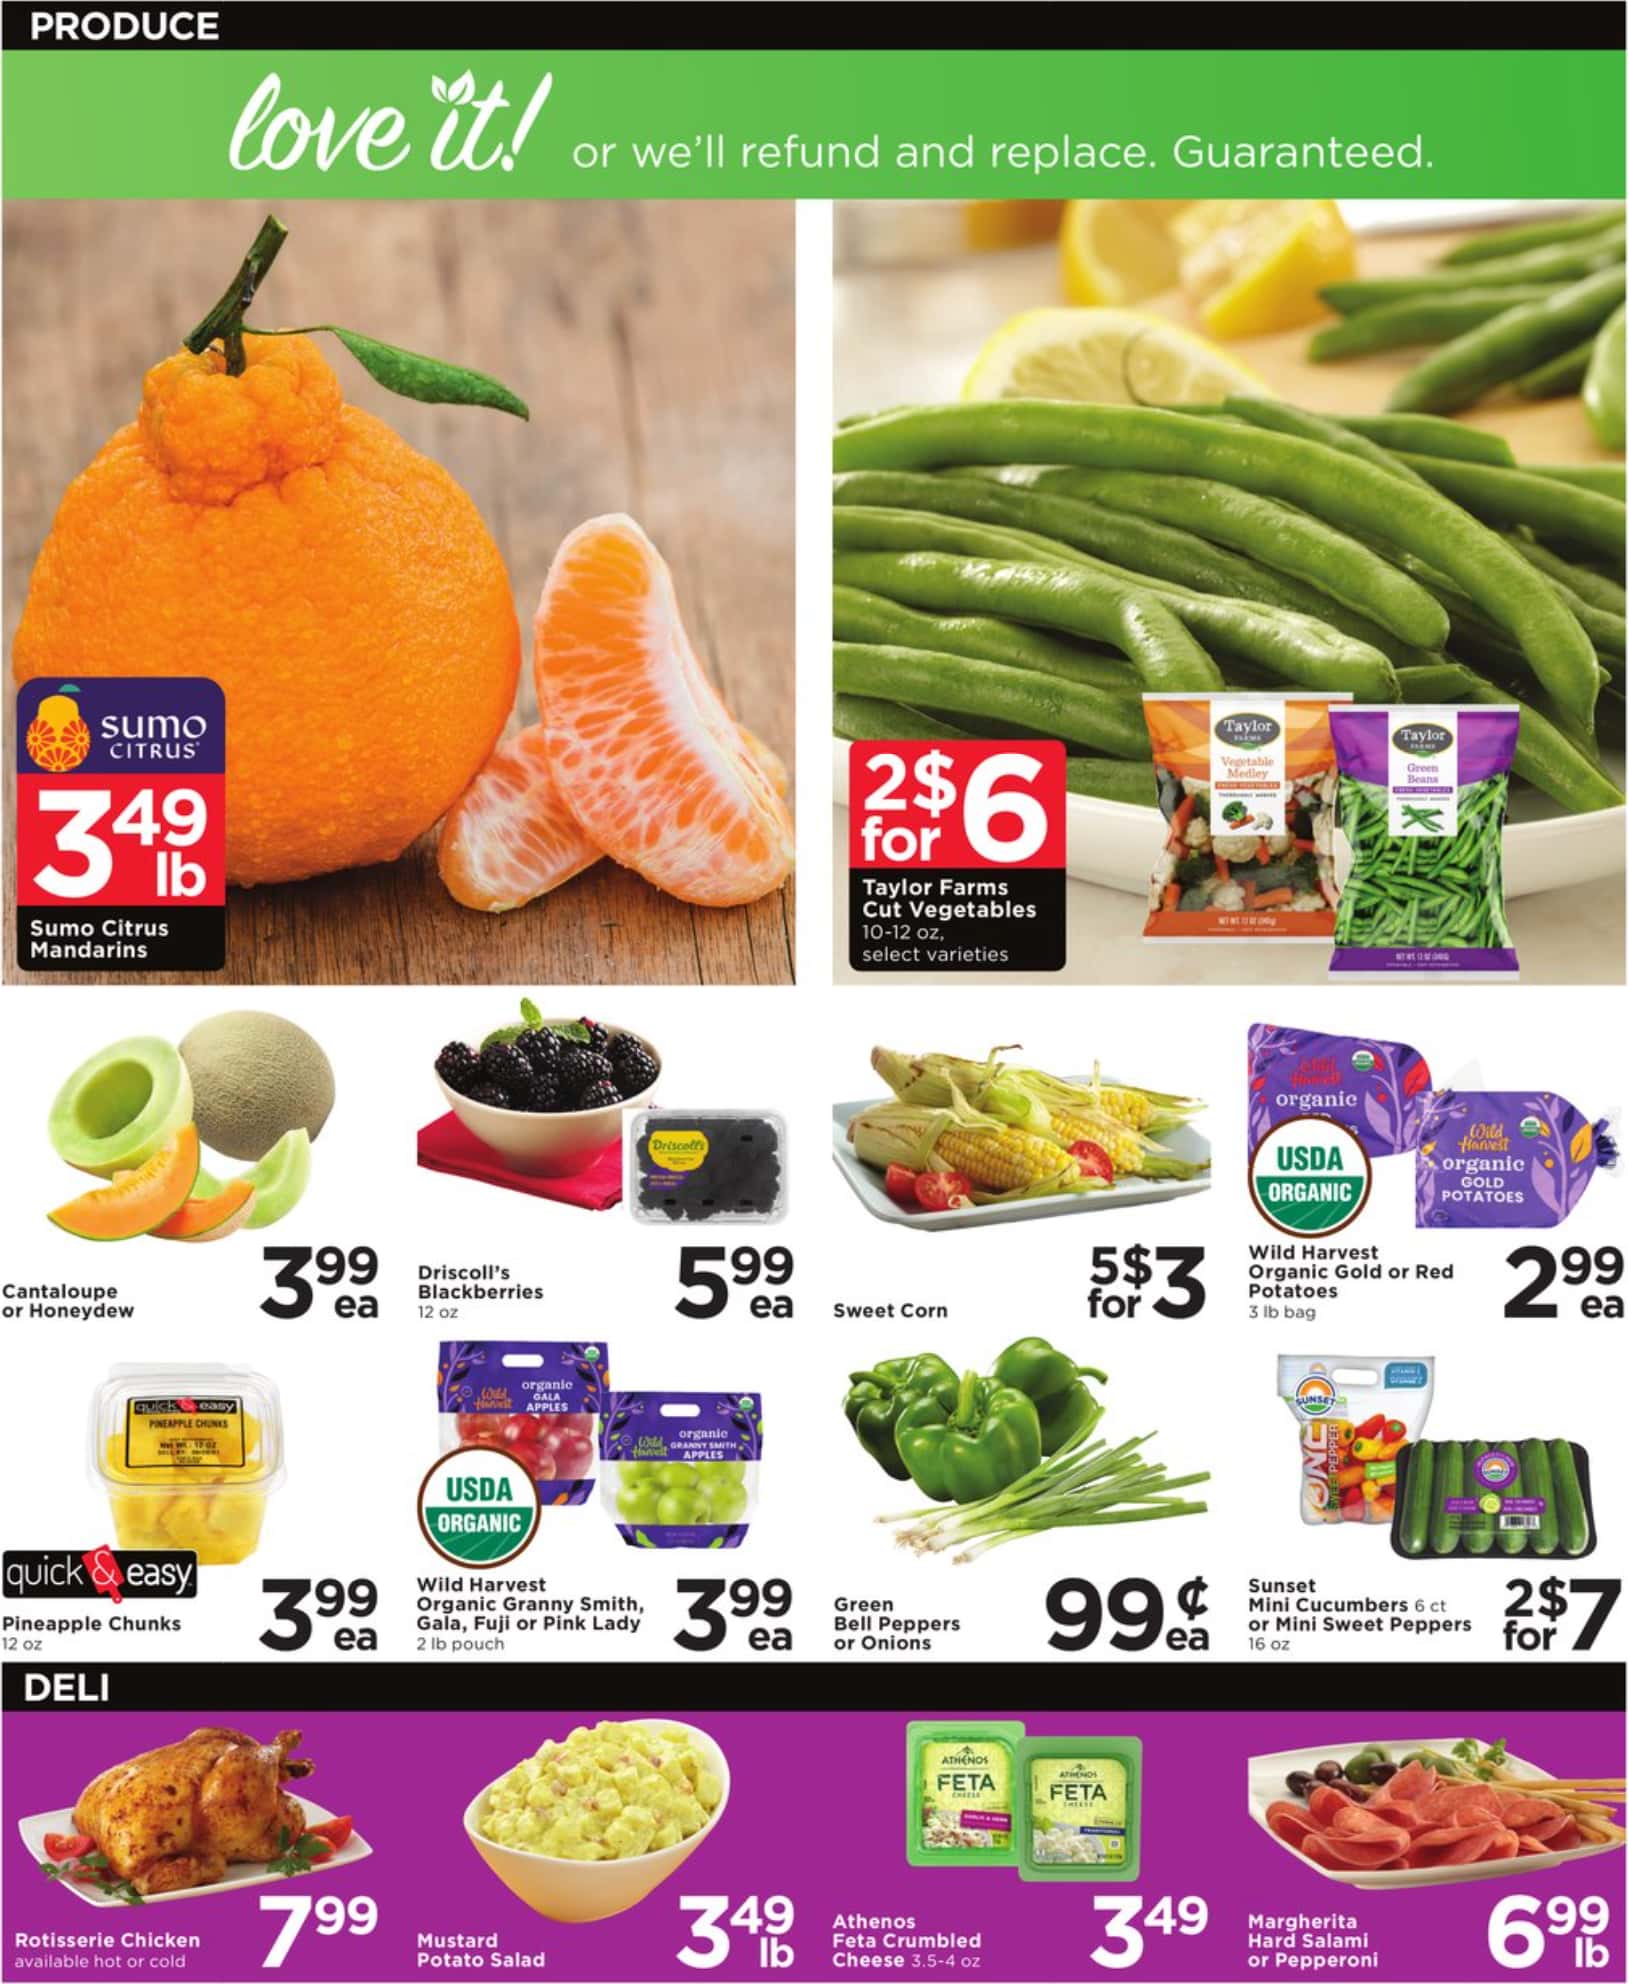 CubFoods_weekly_ad_041424_03